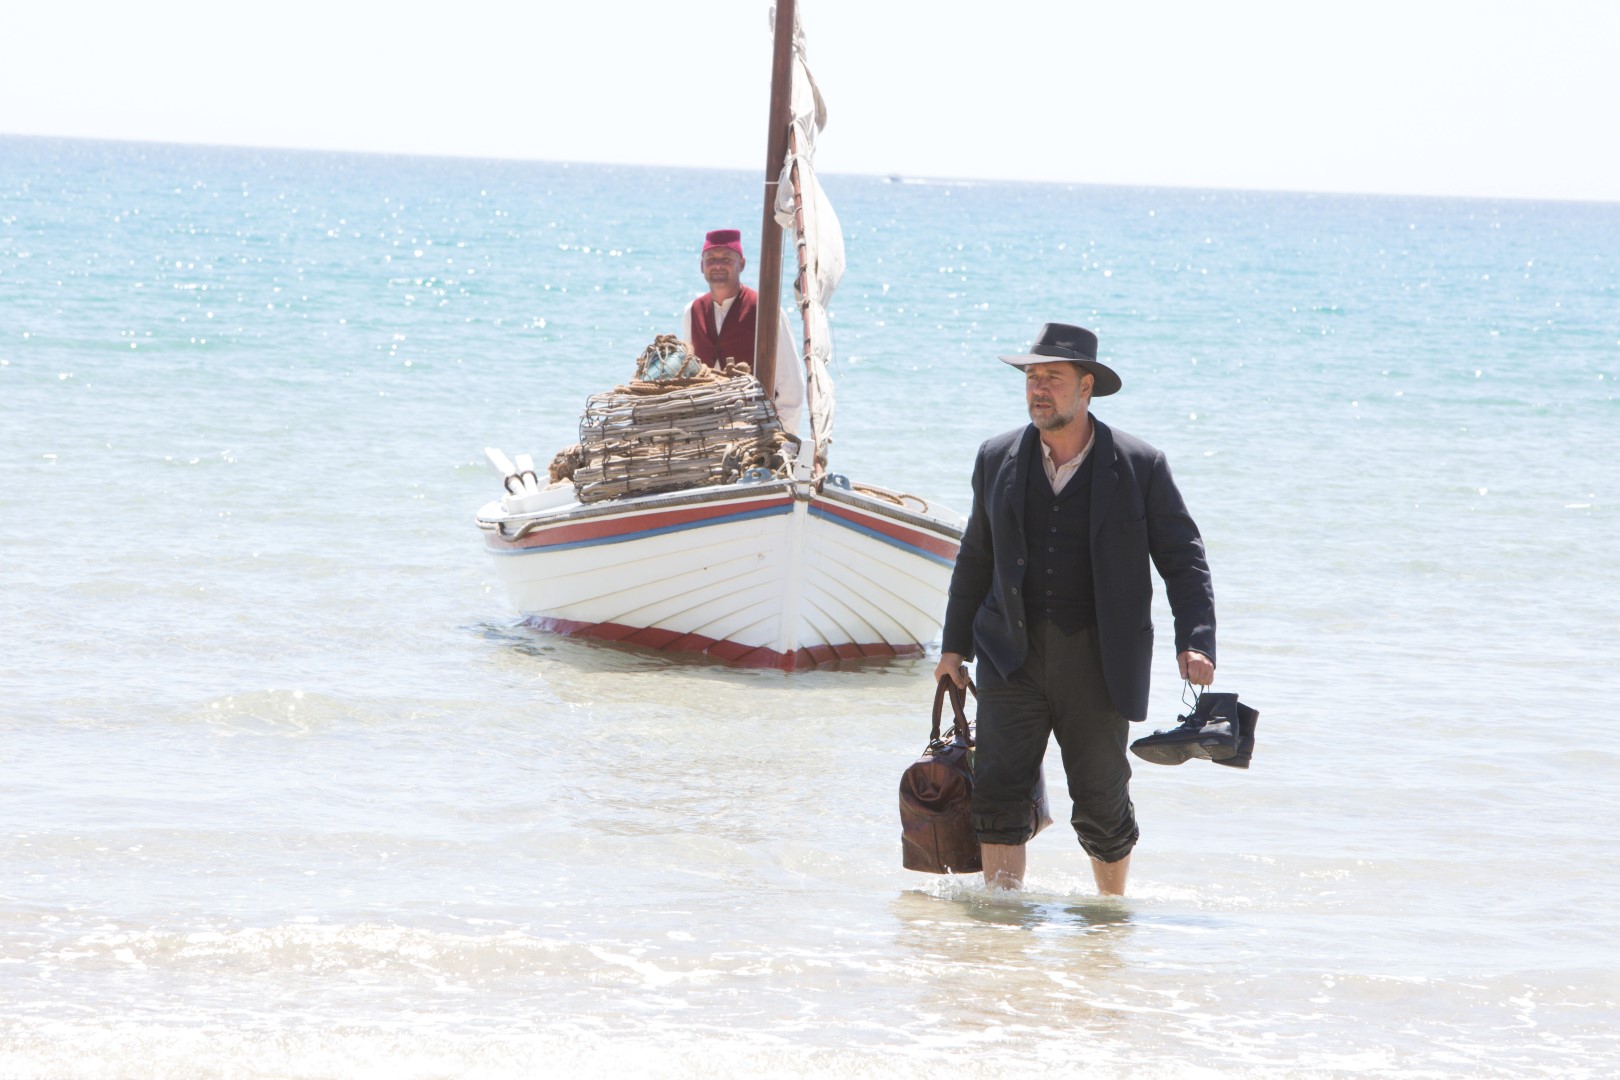 2014 The Water Diviner